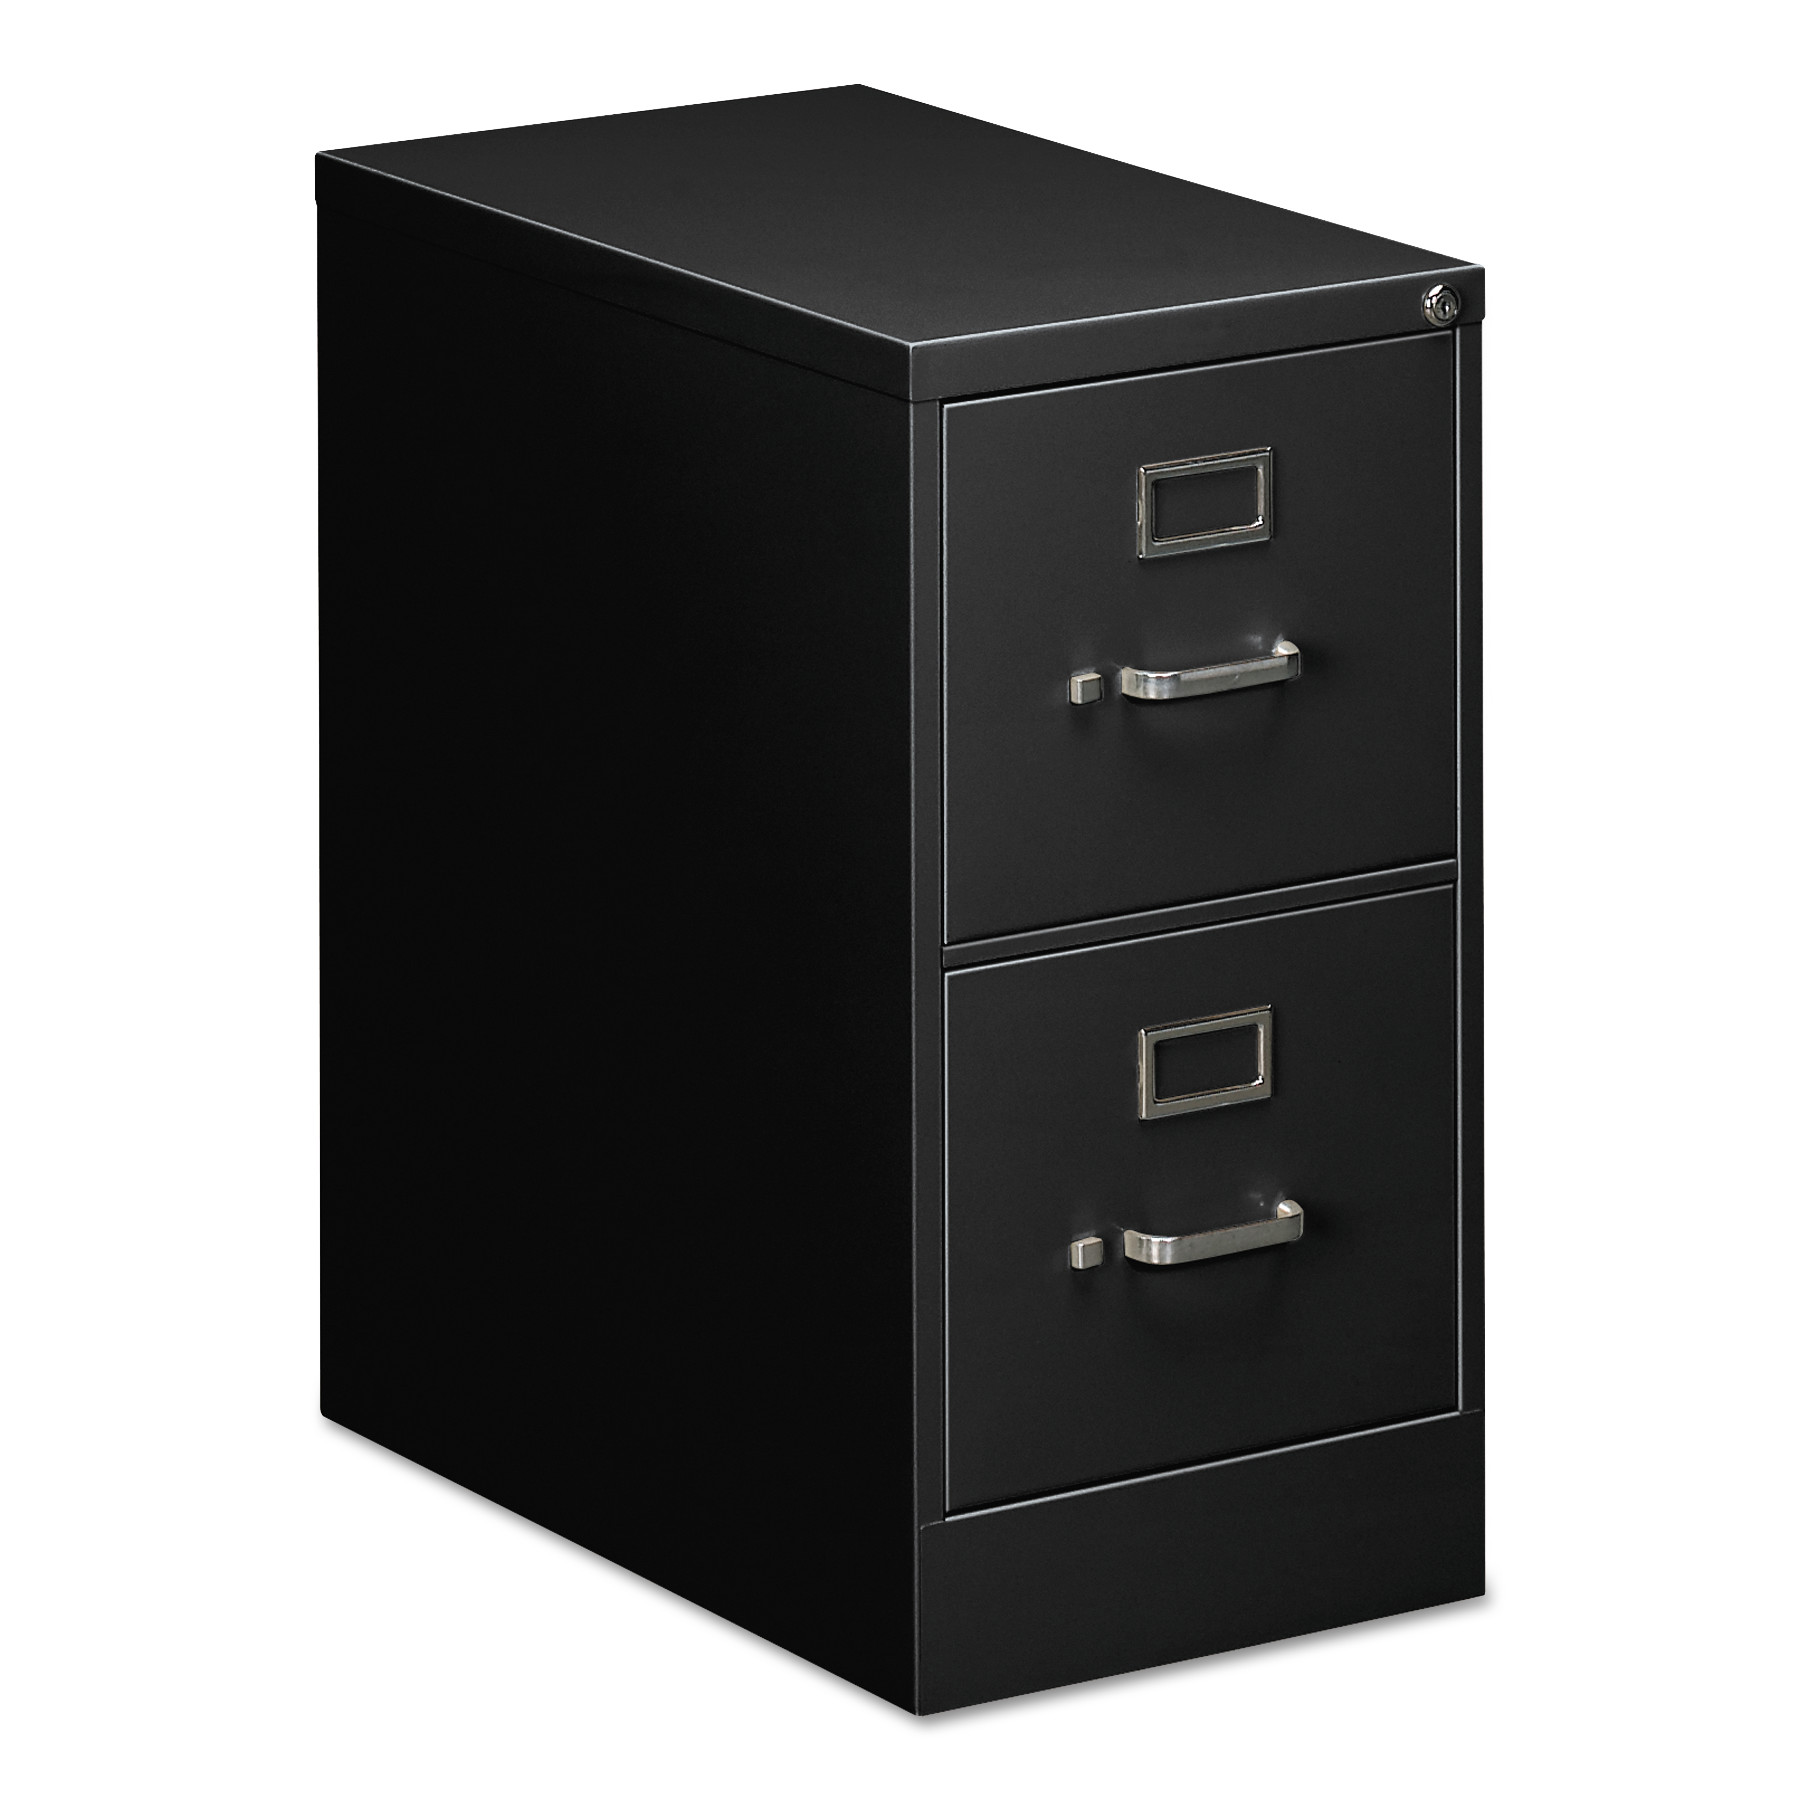 Two-Drawer Economy Vertical File Cabinet, Letter, 15w x 26 1/2d x 29h, Black